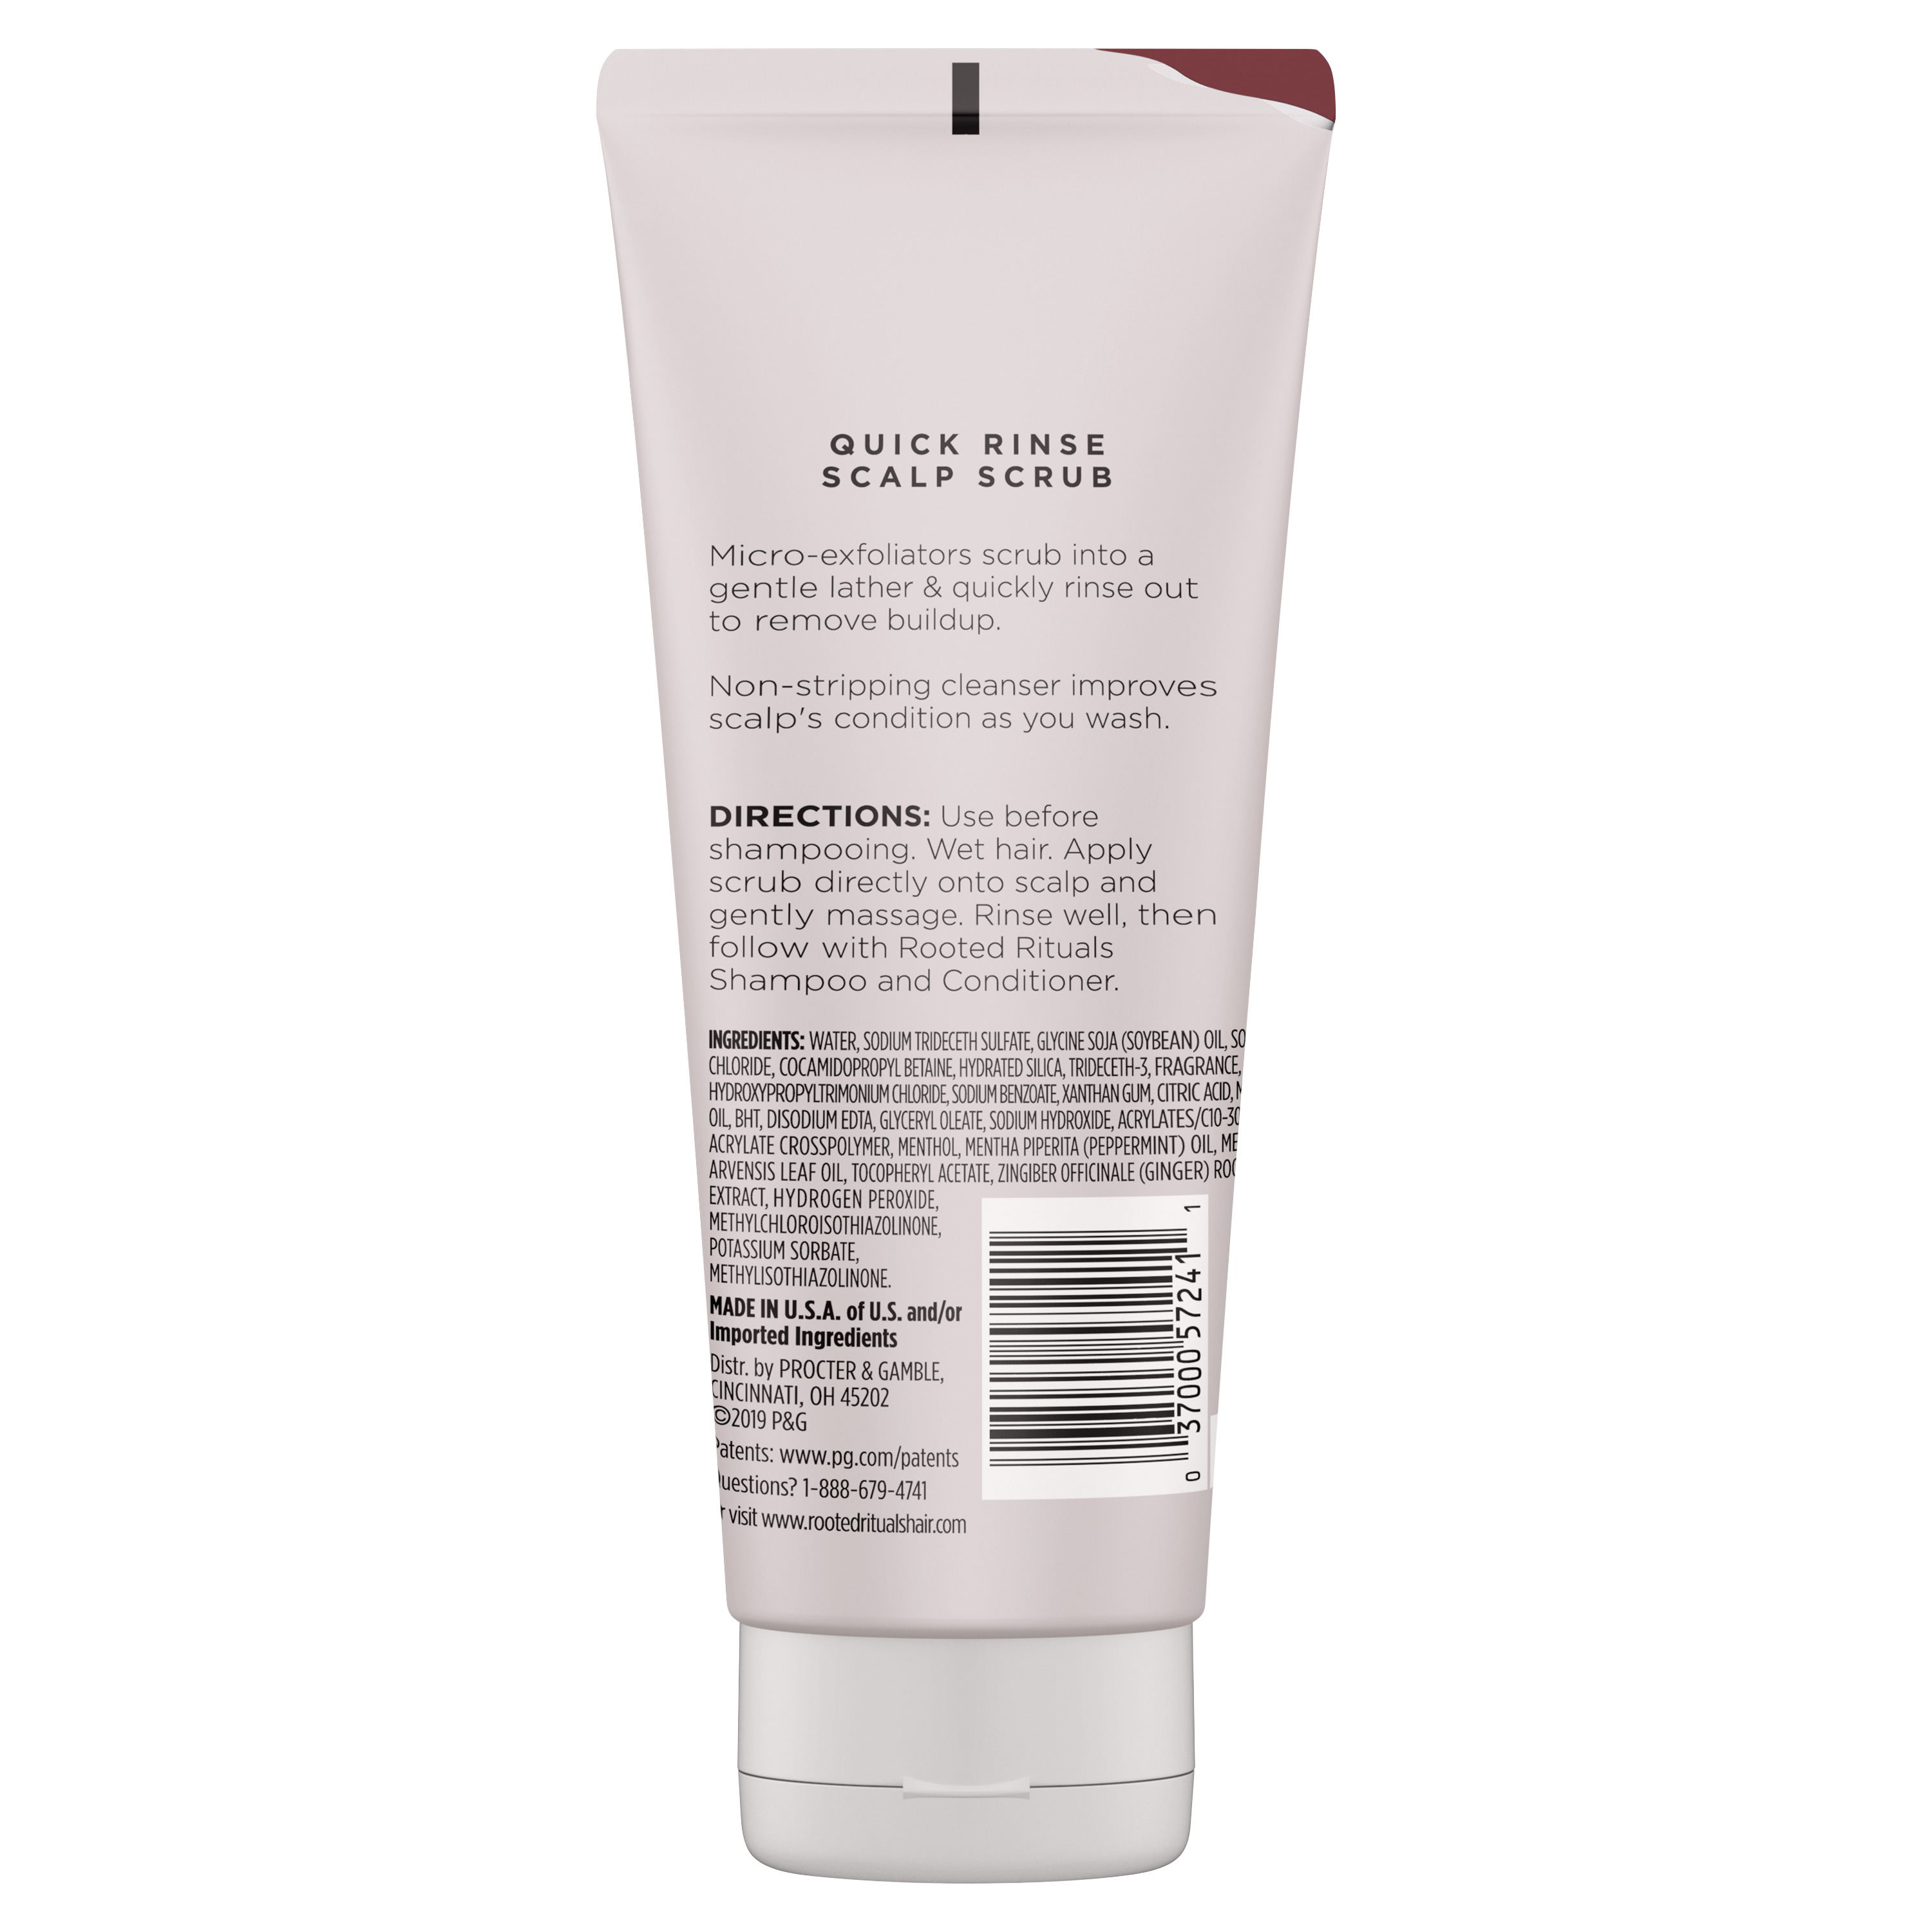 Rooted Rituals Ginger Root and Mint Quick-Rinse Scalp Scrub, 6.7 fl oz - image 3 of 9